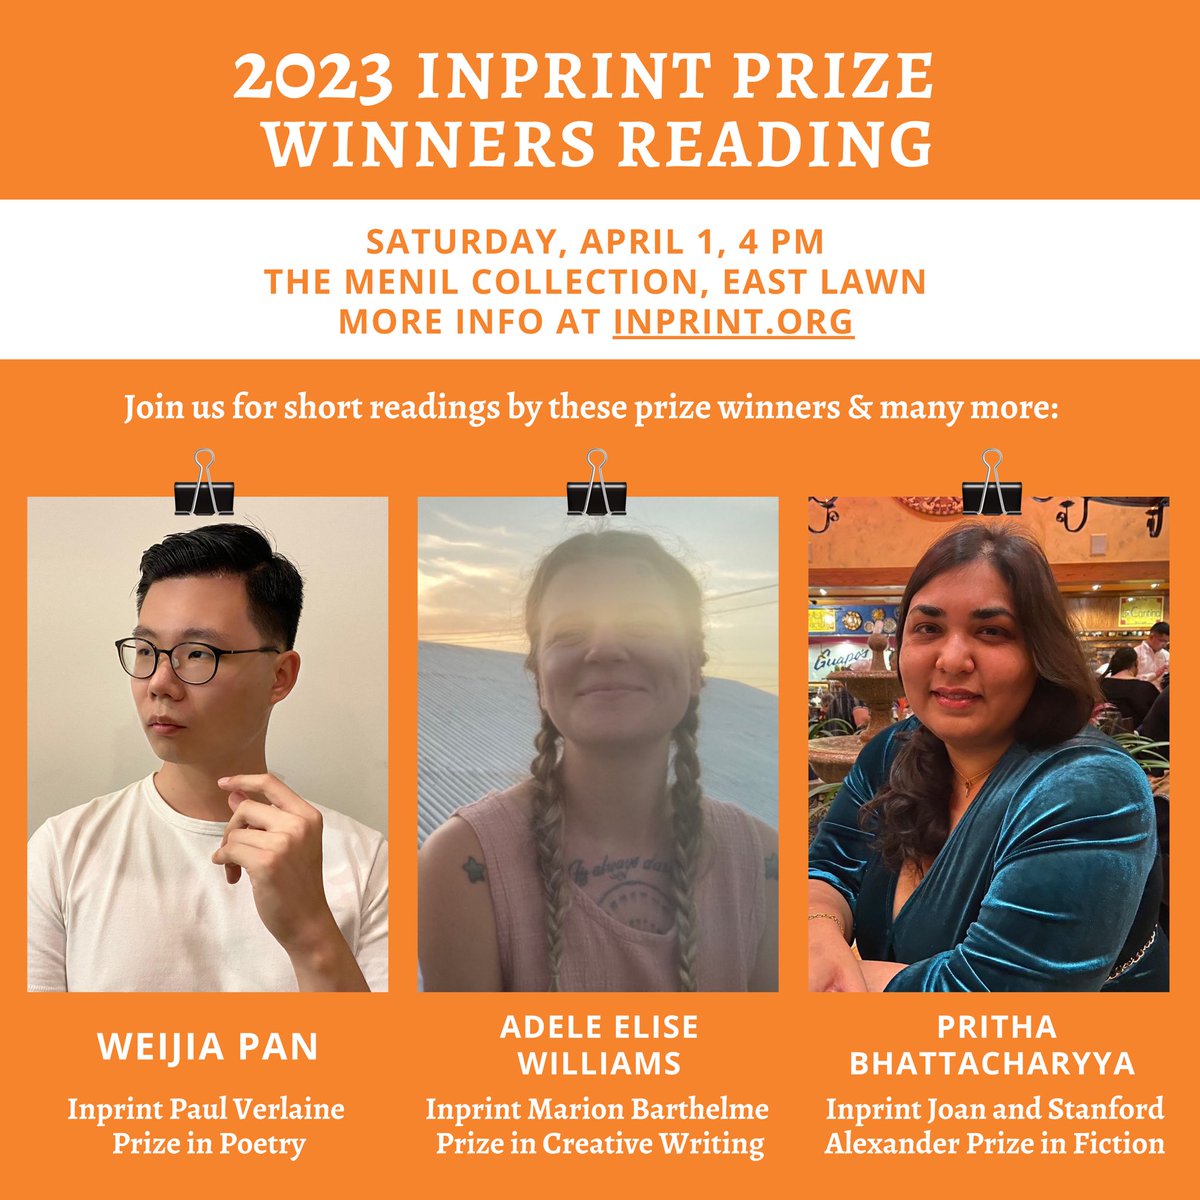 This spring, Inprint awarded 10 prizes ranging from $1,000 – $10,000 to students studying creative writing at @uhcwp and @RiceUniversity. Stop by the @MenilCollection’s Neighborhood Community Day this Saturday to help us celebrate their wonderful achievements! 🥂🥂🥂